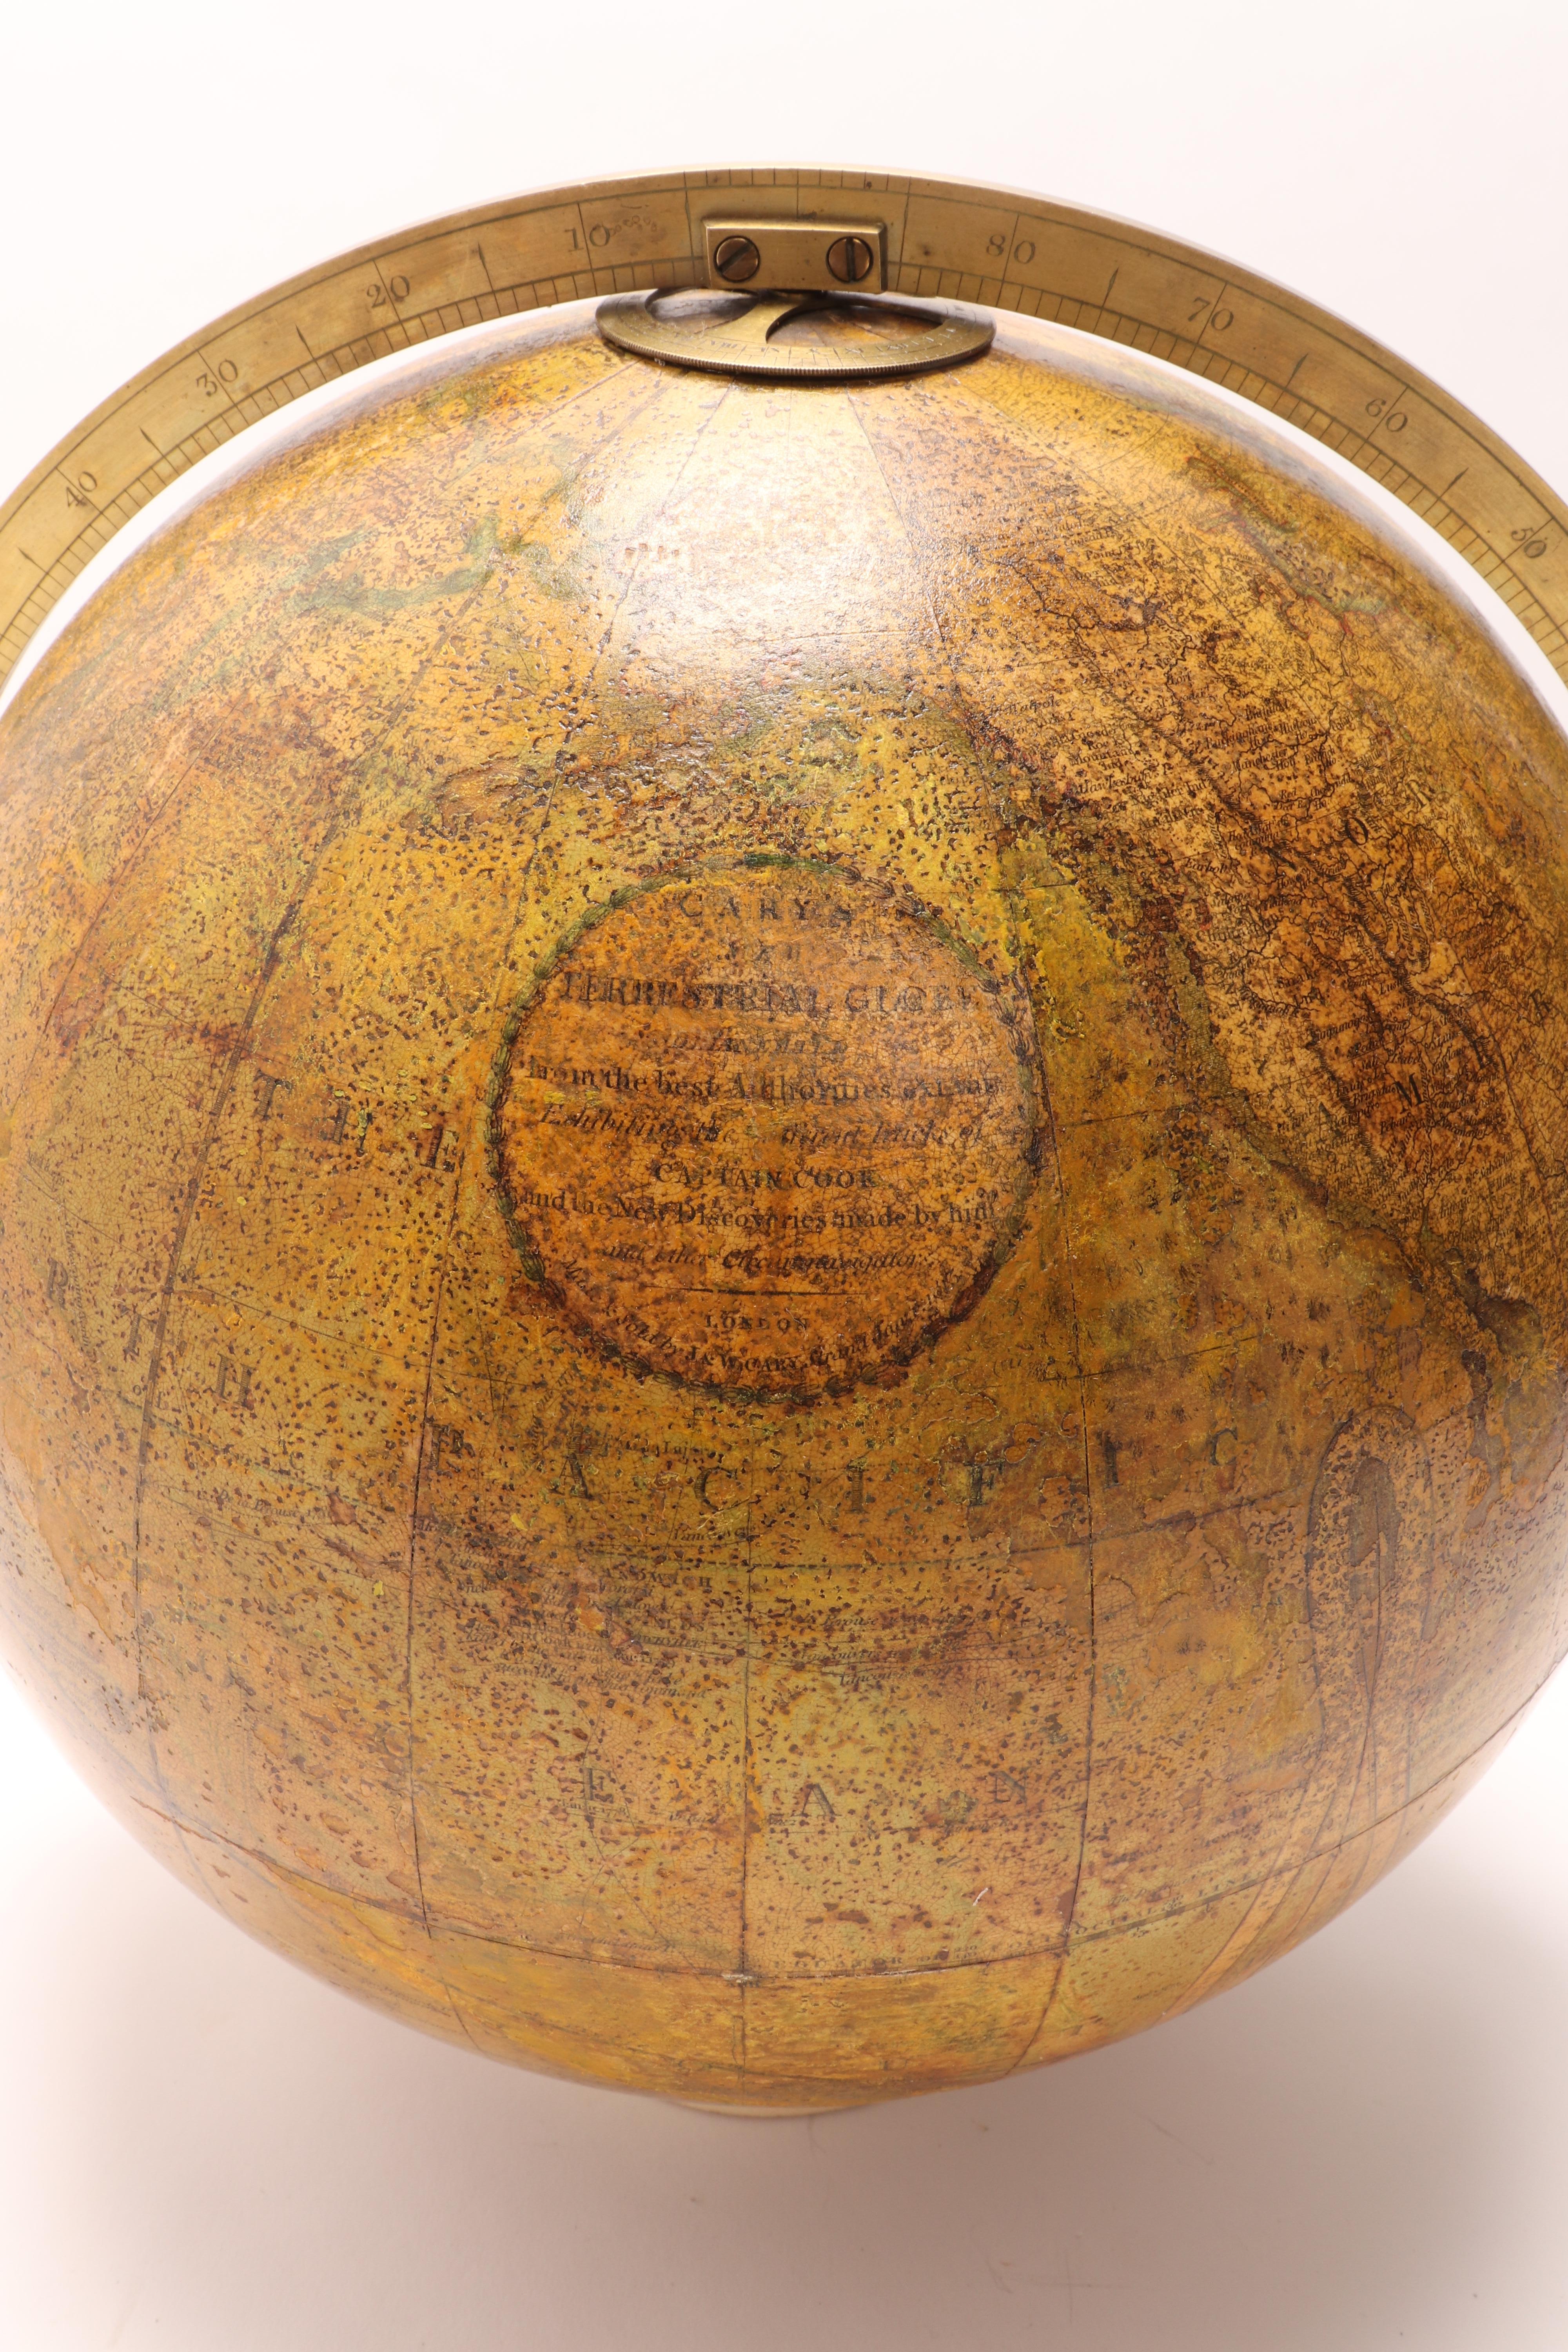 Terrestrial Globe Signed Cary, London, 1800 3